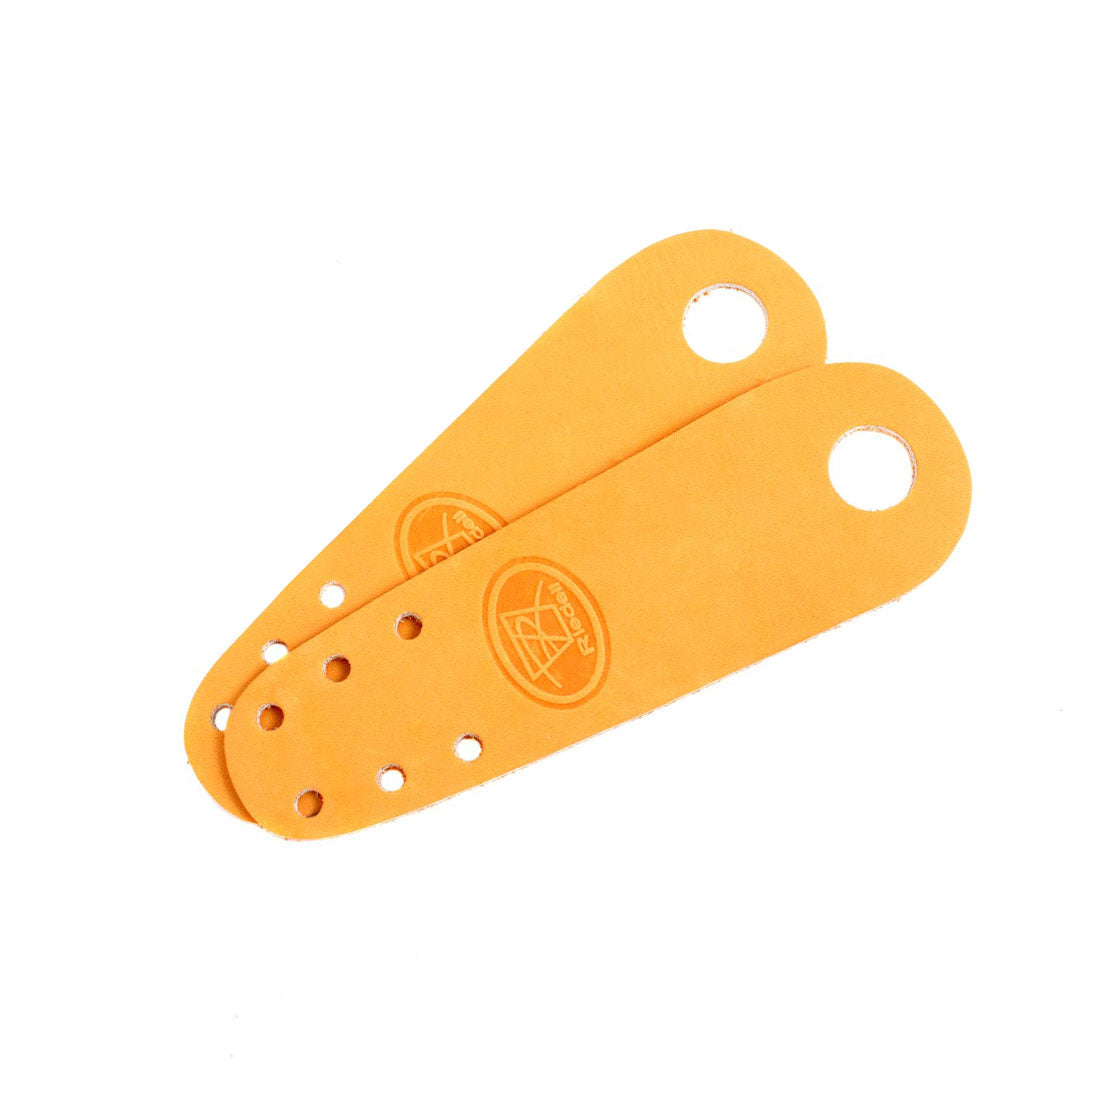 Riedell Flat Toe Guards 2pk - Leather Mango Roller Skate Hardware and Parts